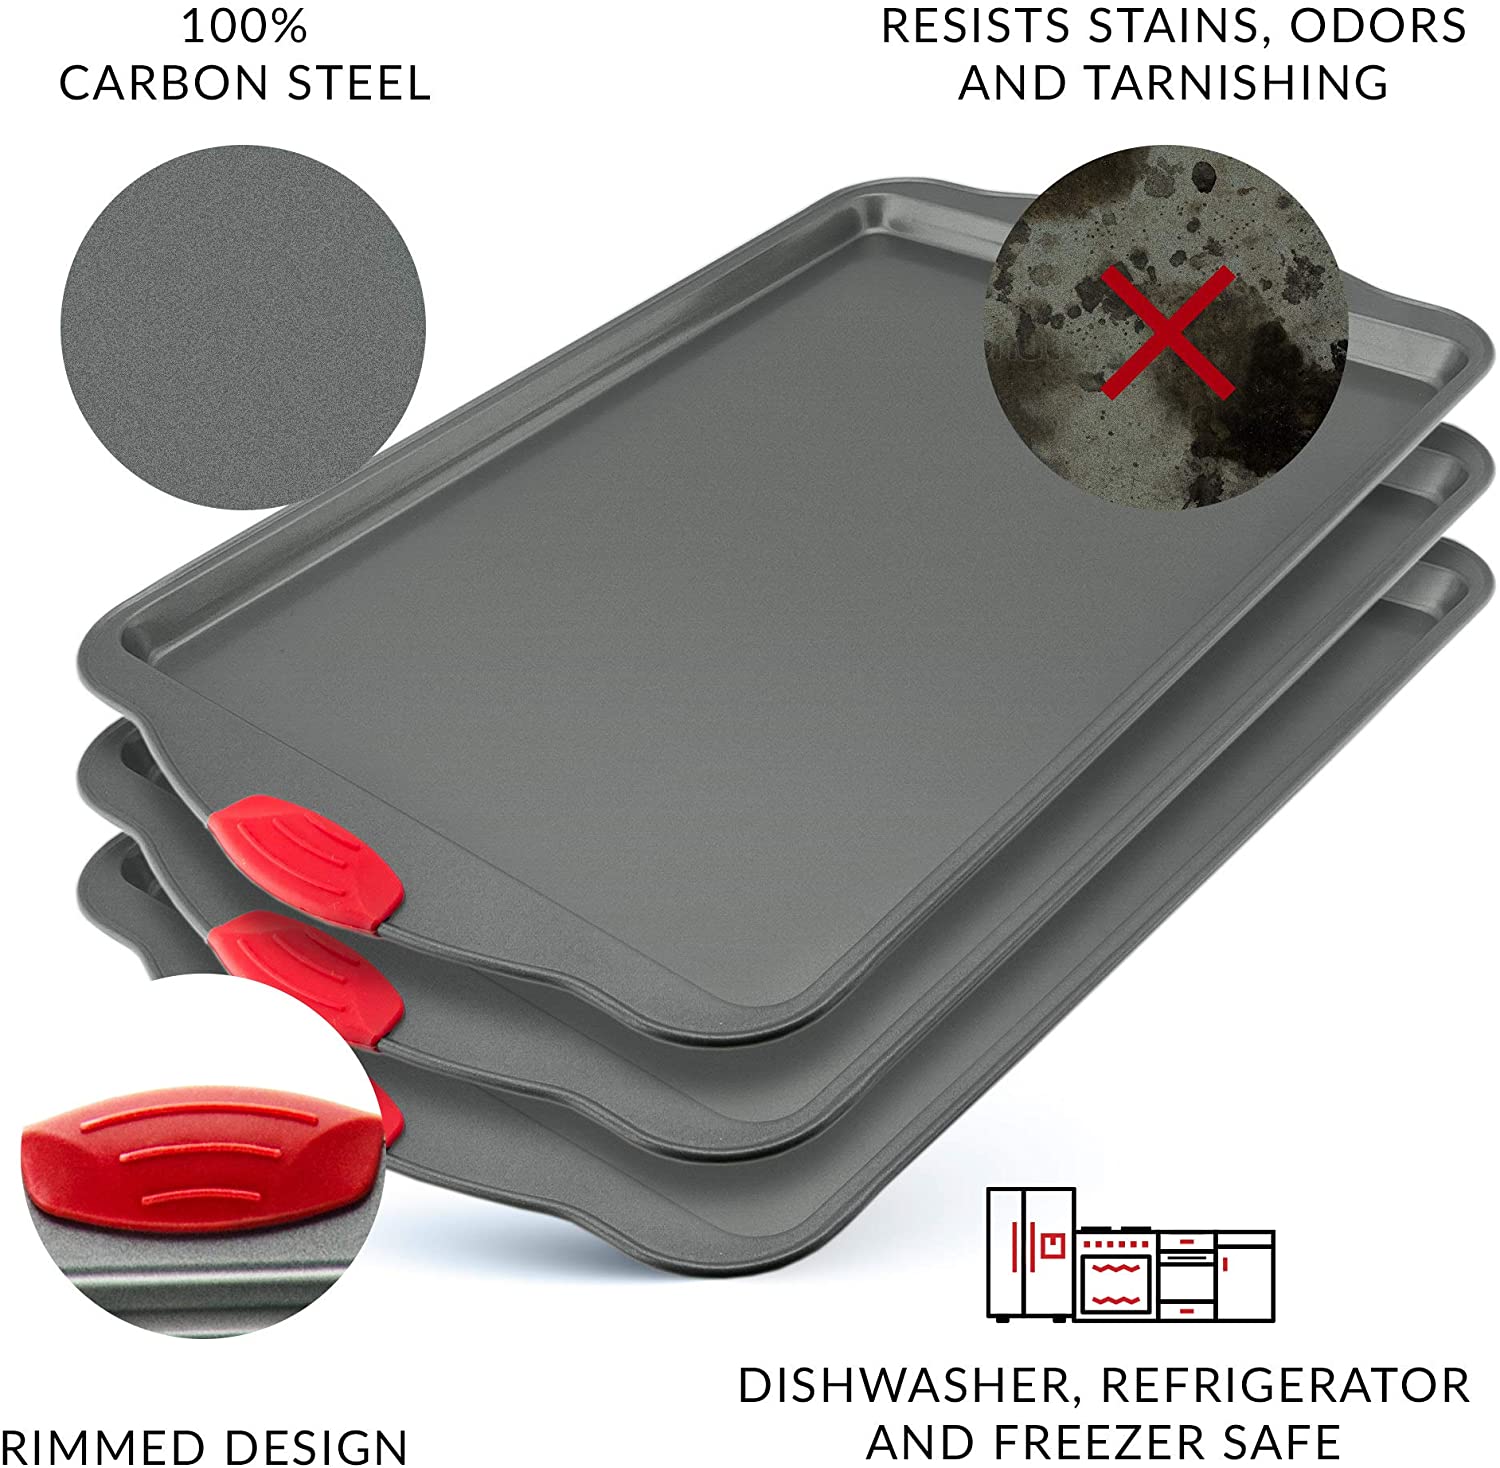 Nifty Solutions Set of 3 Non-Stick Cookie and Baking Sheets – Small, Medium  and Large Pans, Non-Stick Coated Steel